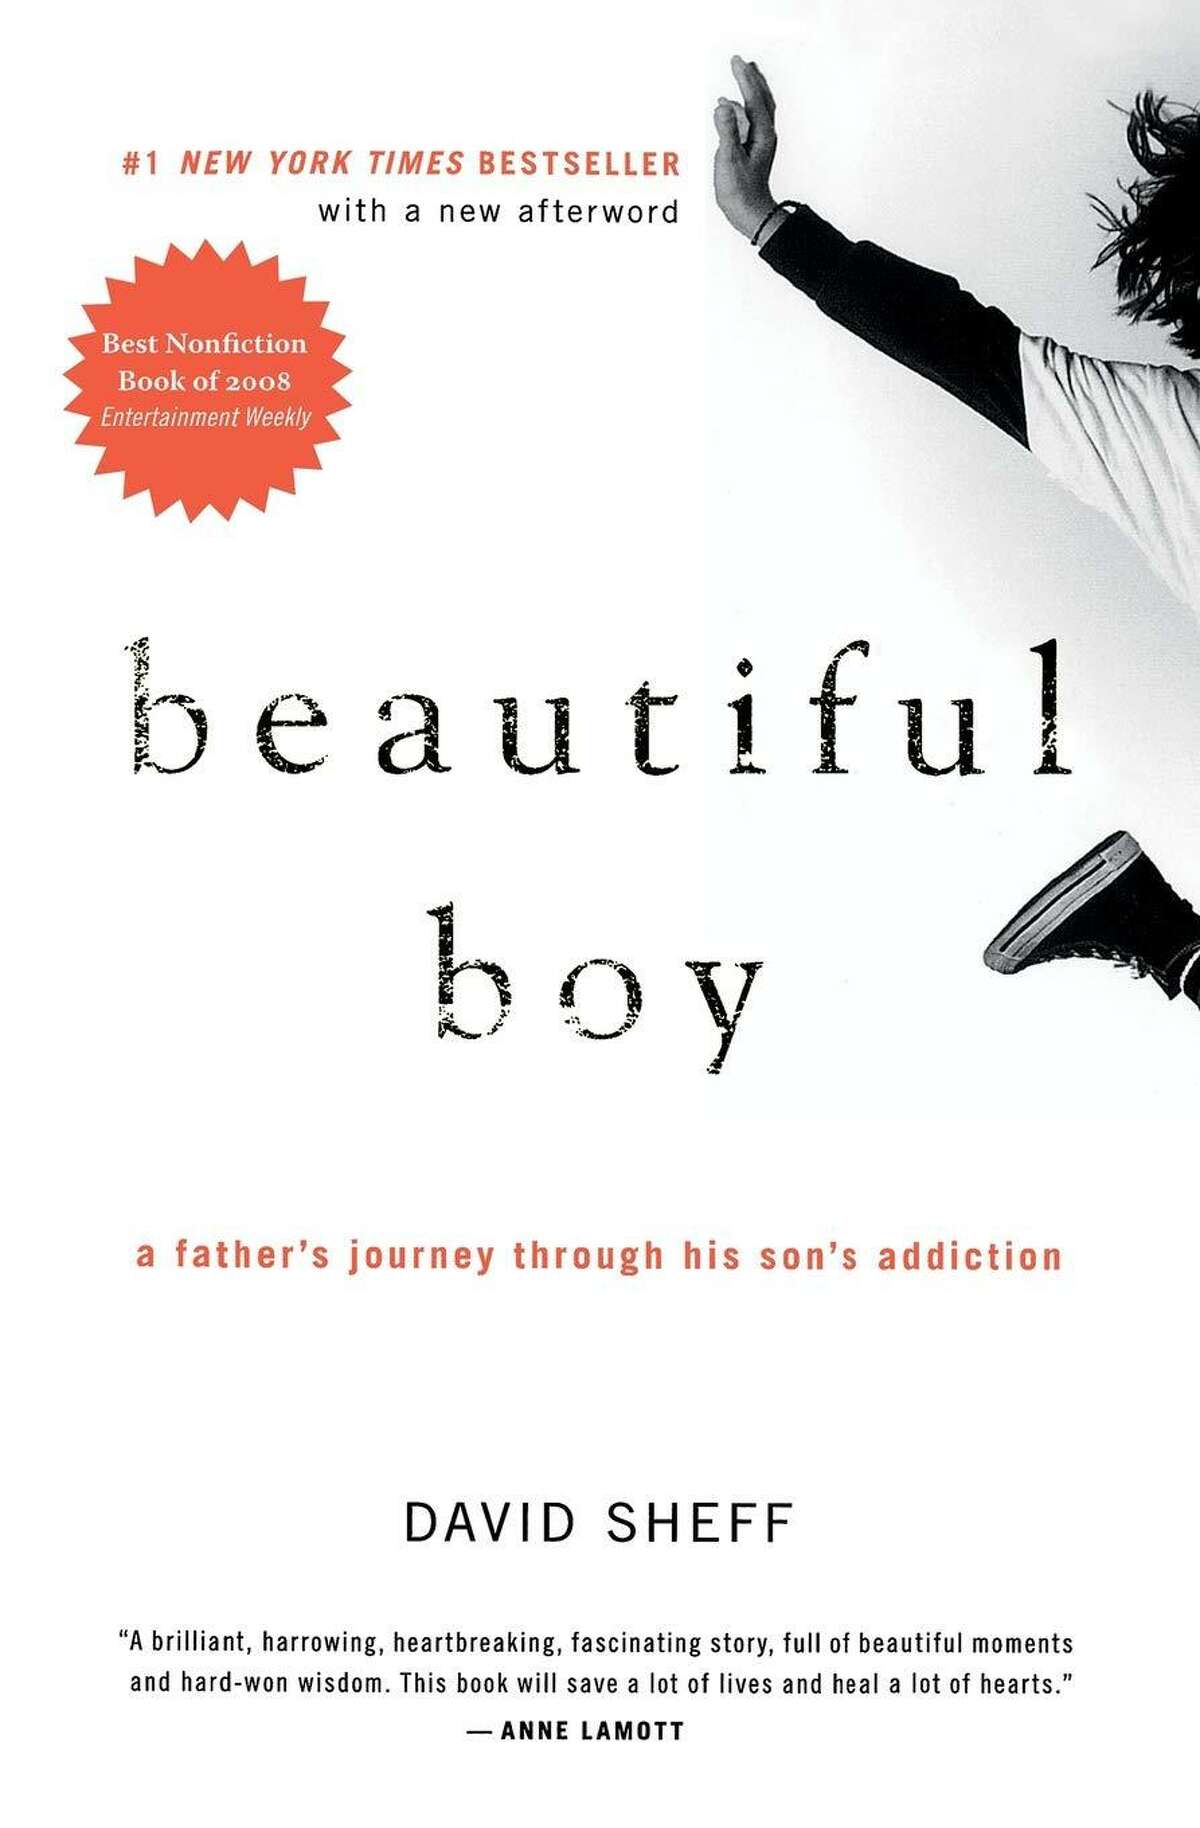 The first book in the book club is "Beautiful Boy."